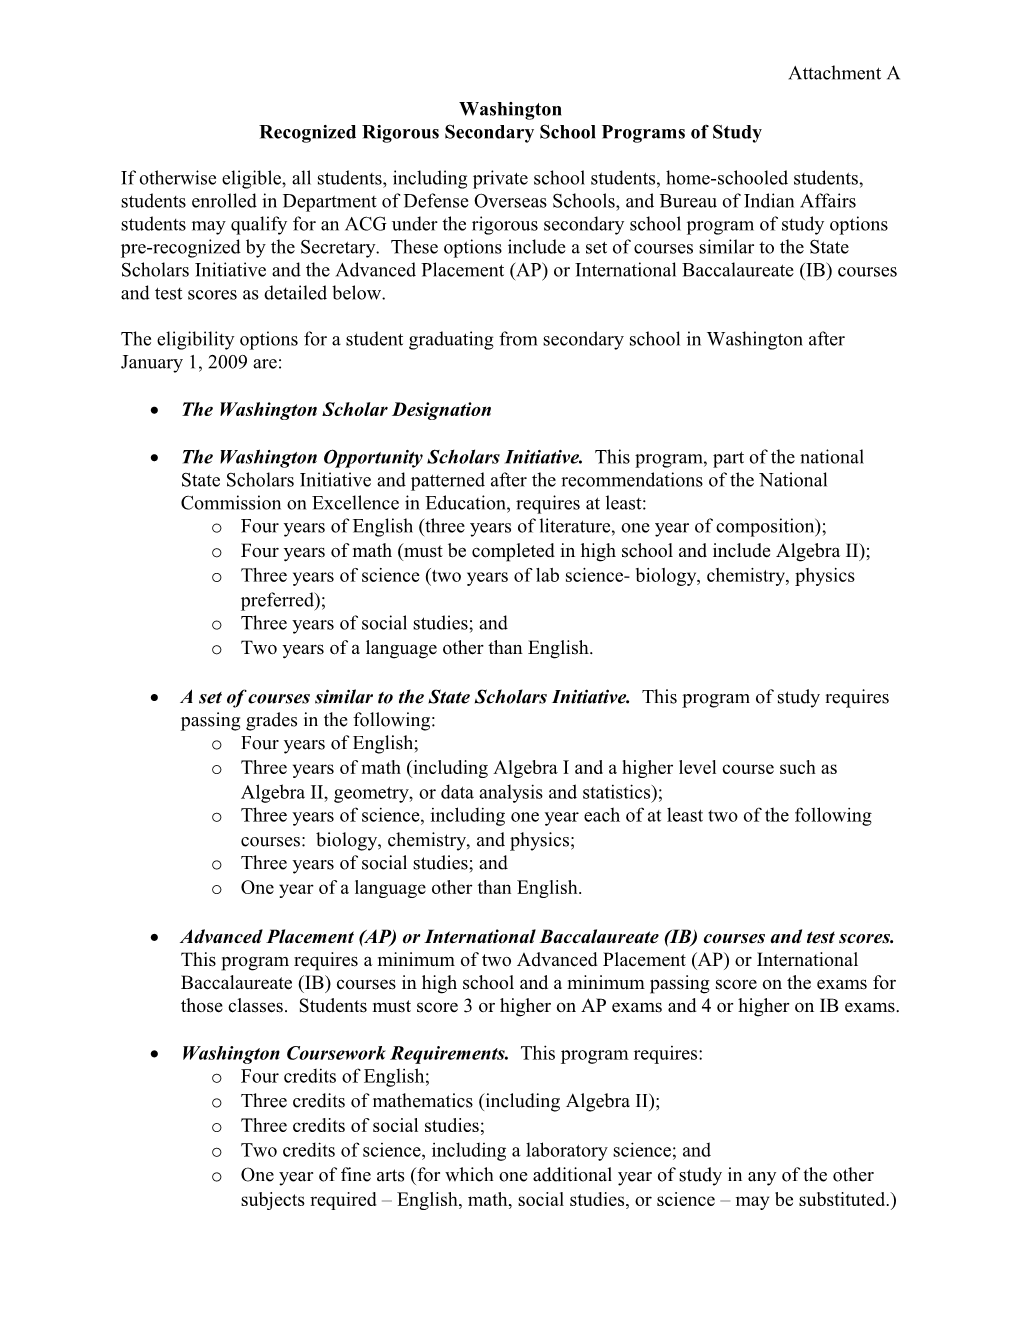 Academic Competitiveness Grants - Attachment to Washington Letter - 2009 (MS Word)